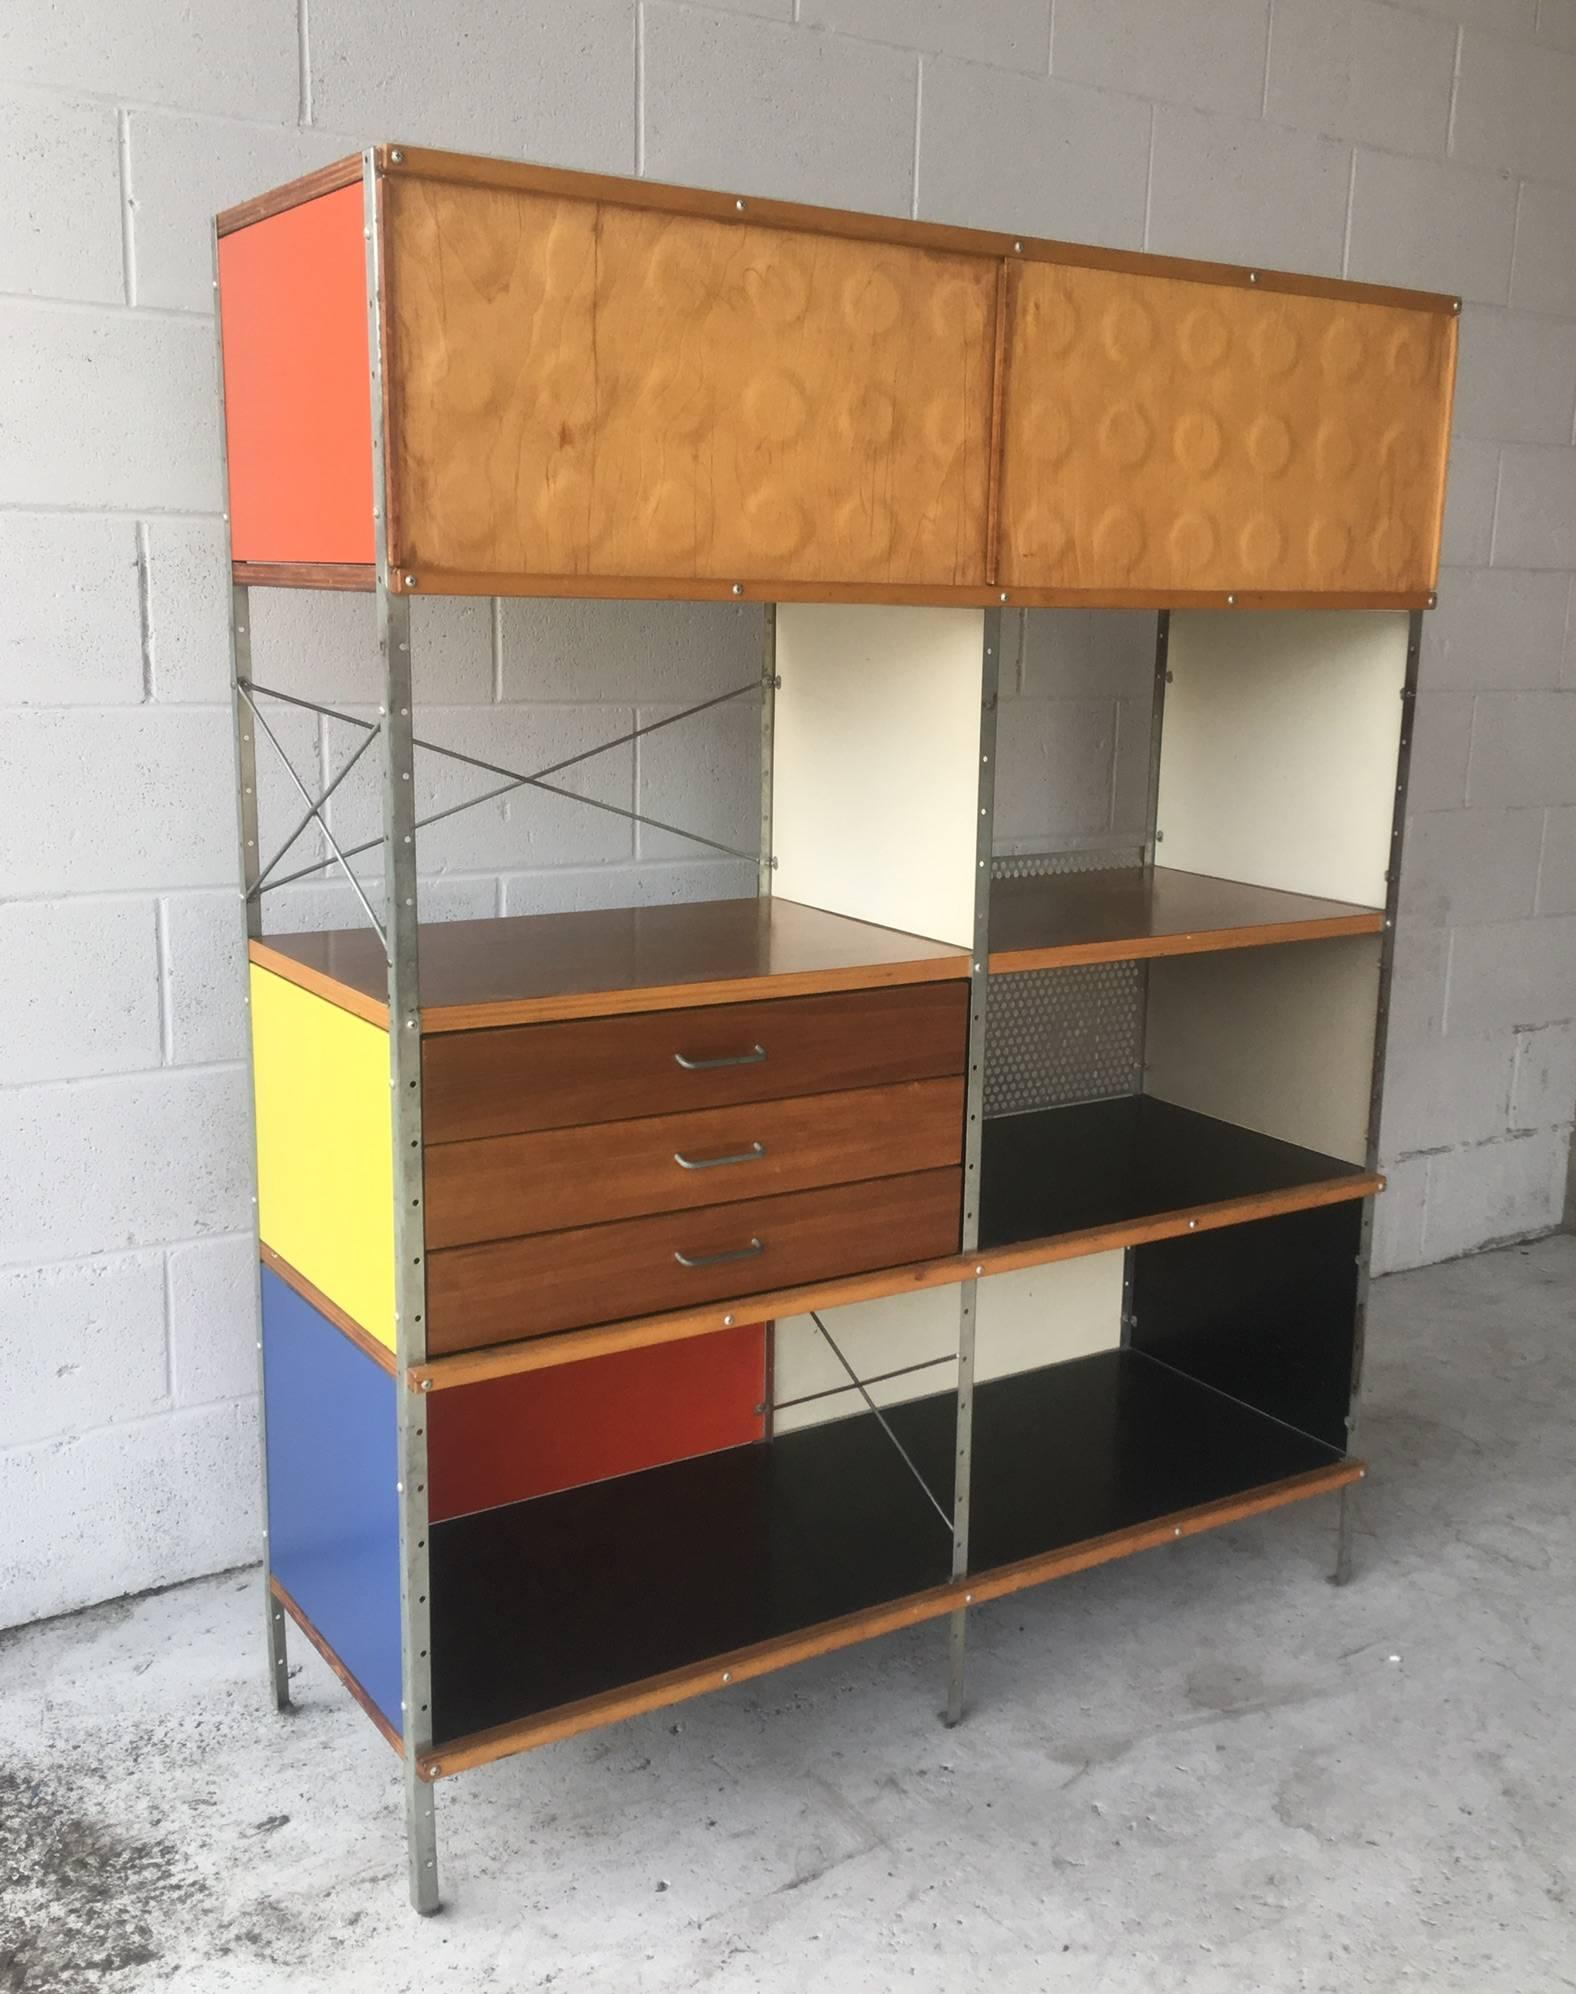 The holy grail for Eames collectors. This marvellous ESU is from the first generation. Features walnut veneer and primarily colored panels, the most sought after combination. Also features two birch dimple doors for top section. Drawers function